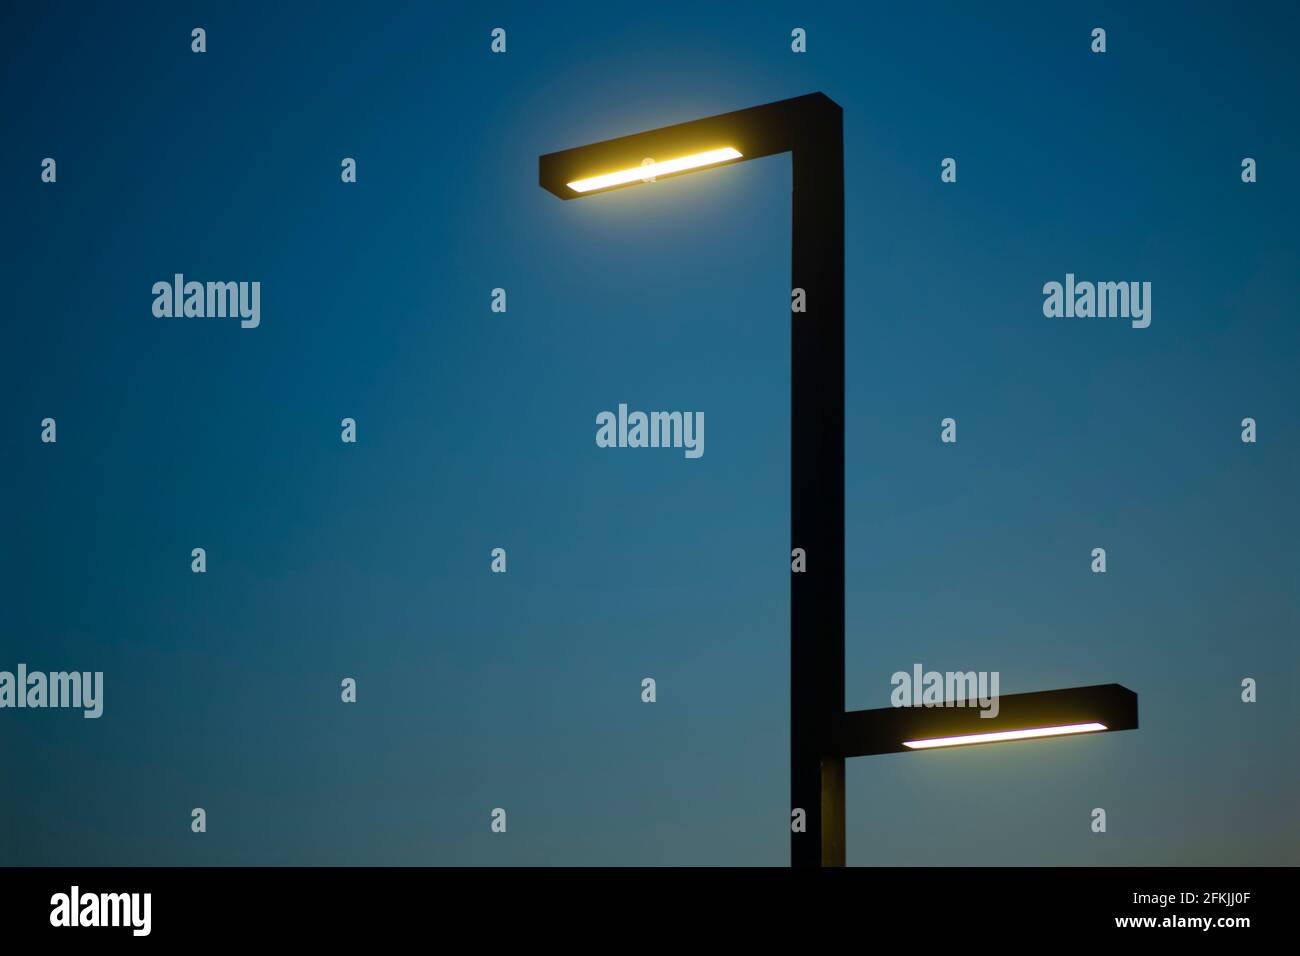 Lamp post against the background of the night sky. Modern lamppost with evening electric lighting. Minimal art photography. Stock Photo